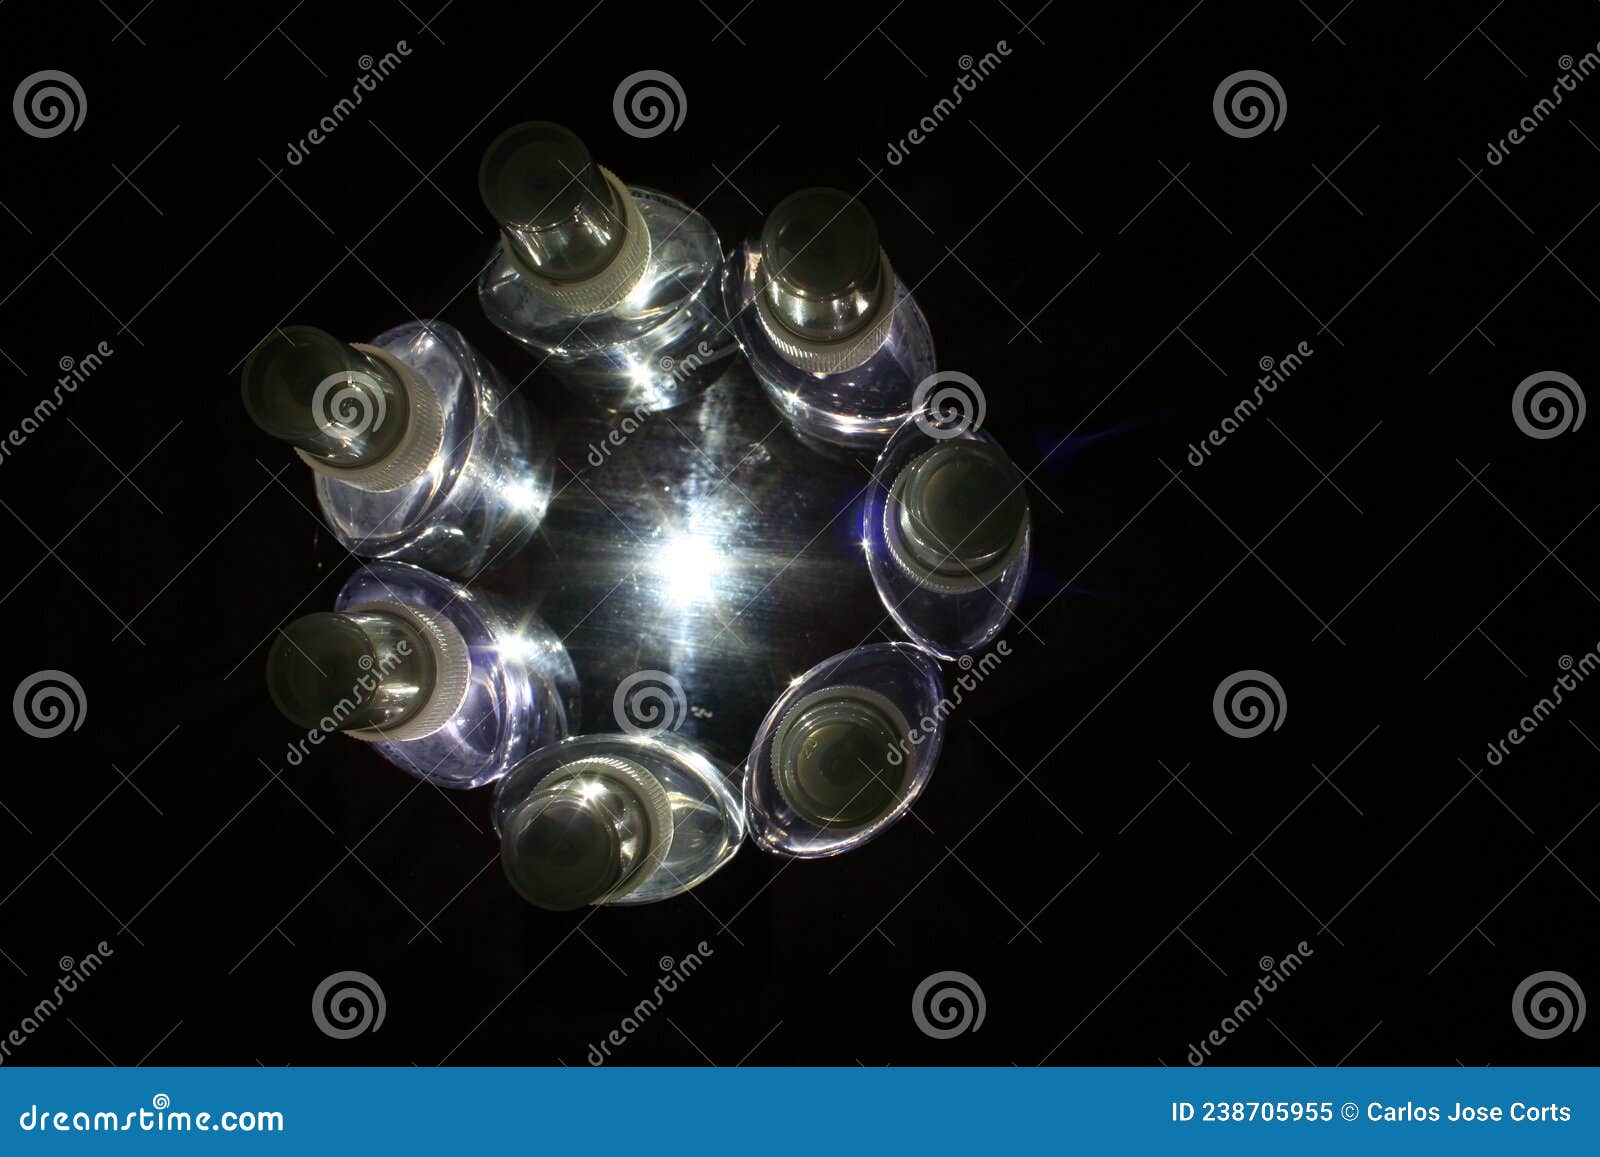 plastic bottle containers in a circle of light